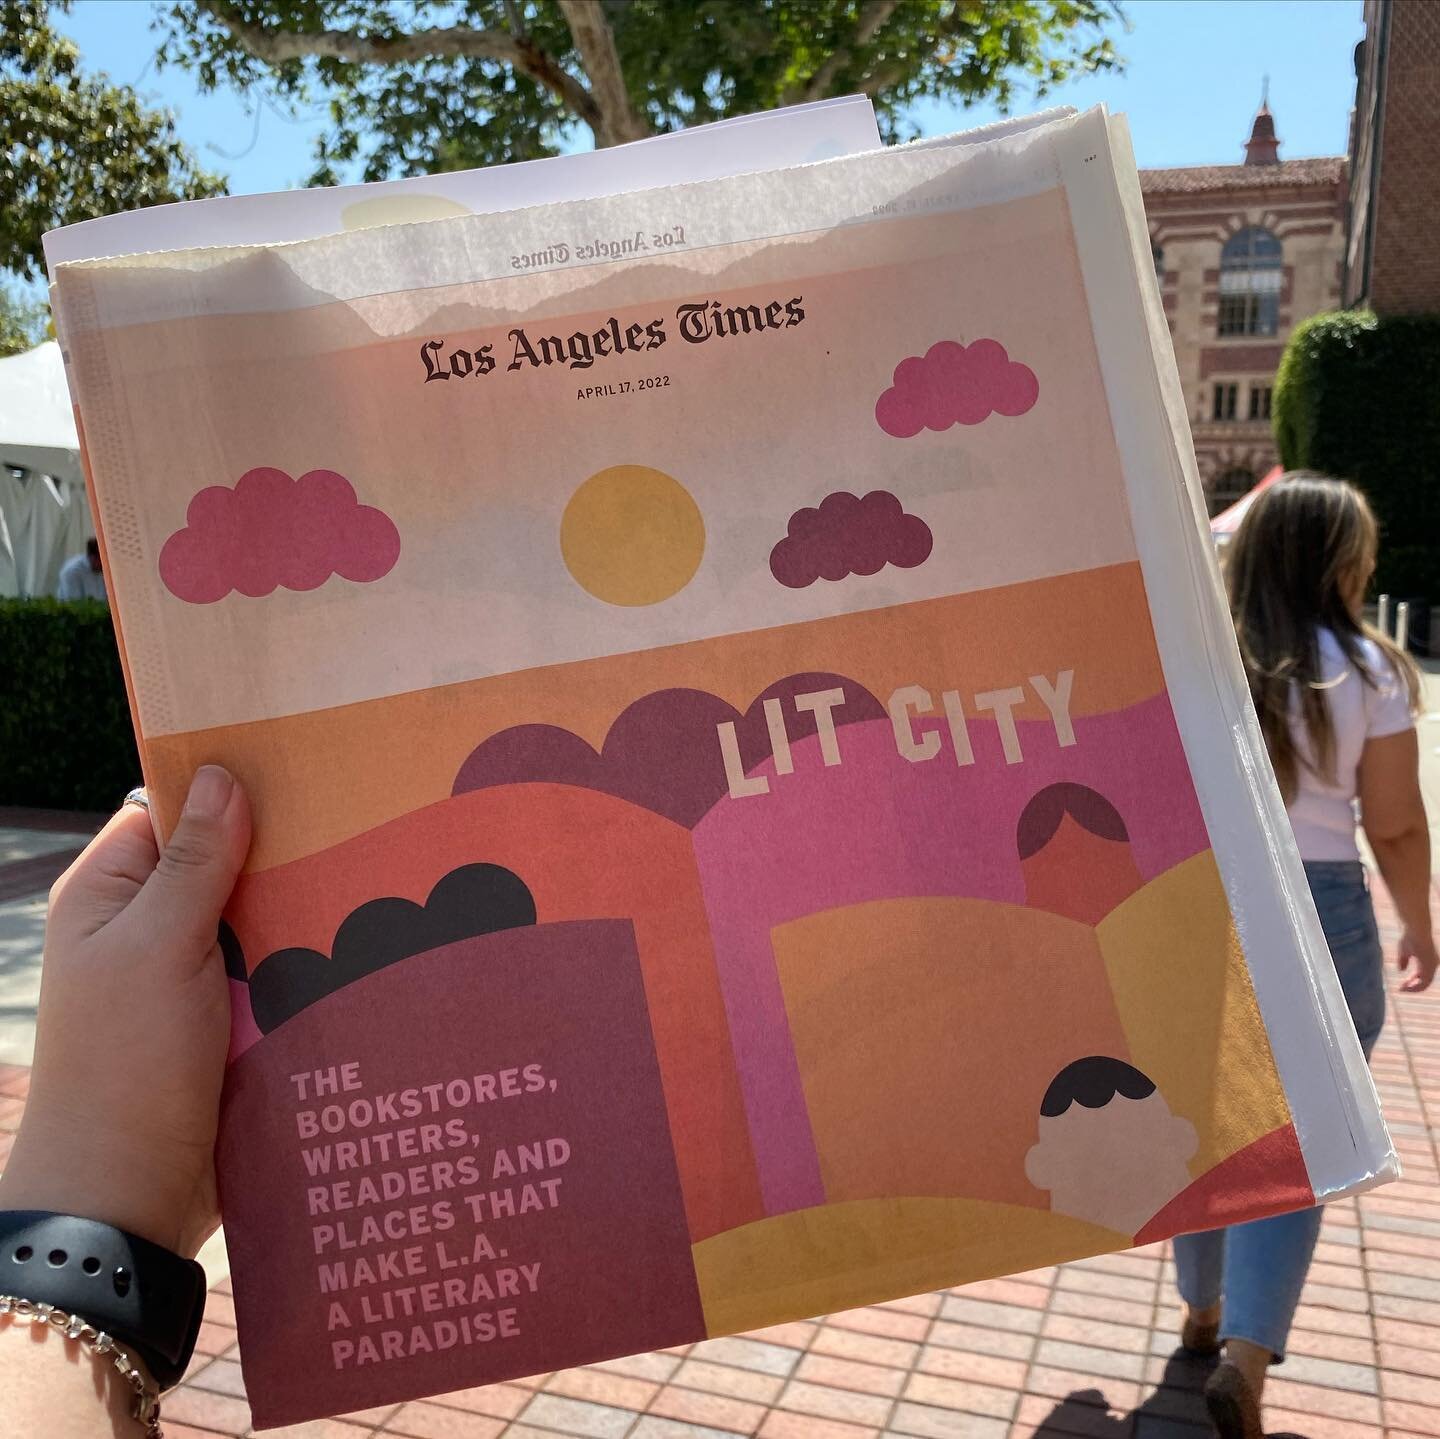 Hi, everyone! It&rsquo;s me, @_andreitam @guatemalcriada , taking over the LxP account for my day at LA Times Festival of Books @latimesfob ⚡️ I&rsquo;m excited to catch some writer discussions and browse all the booths! Especially excited to check o